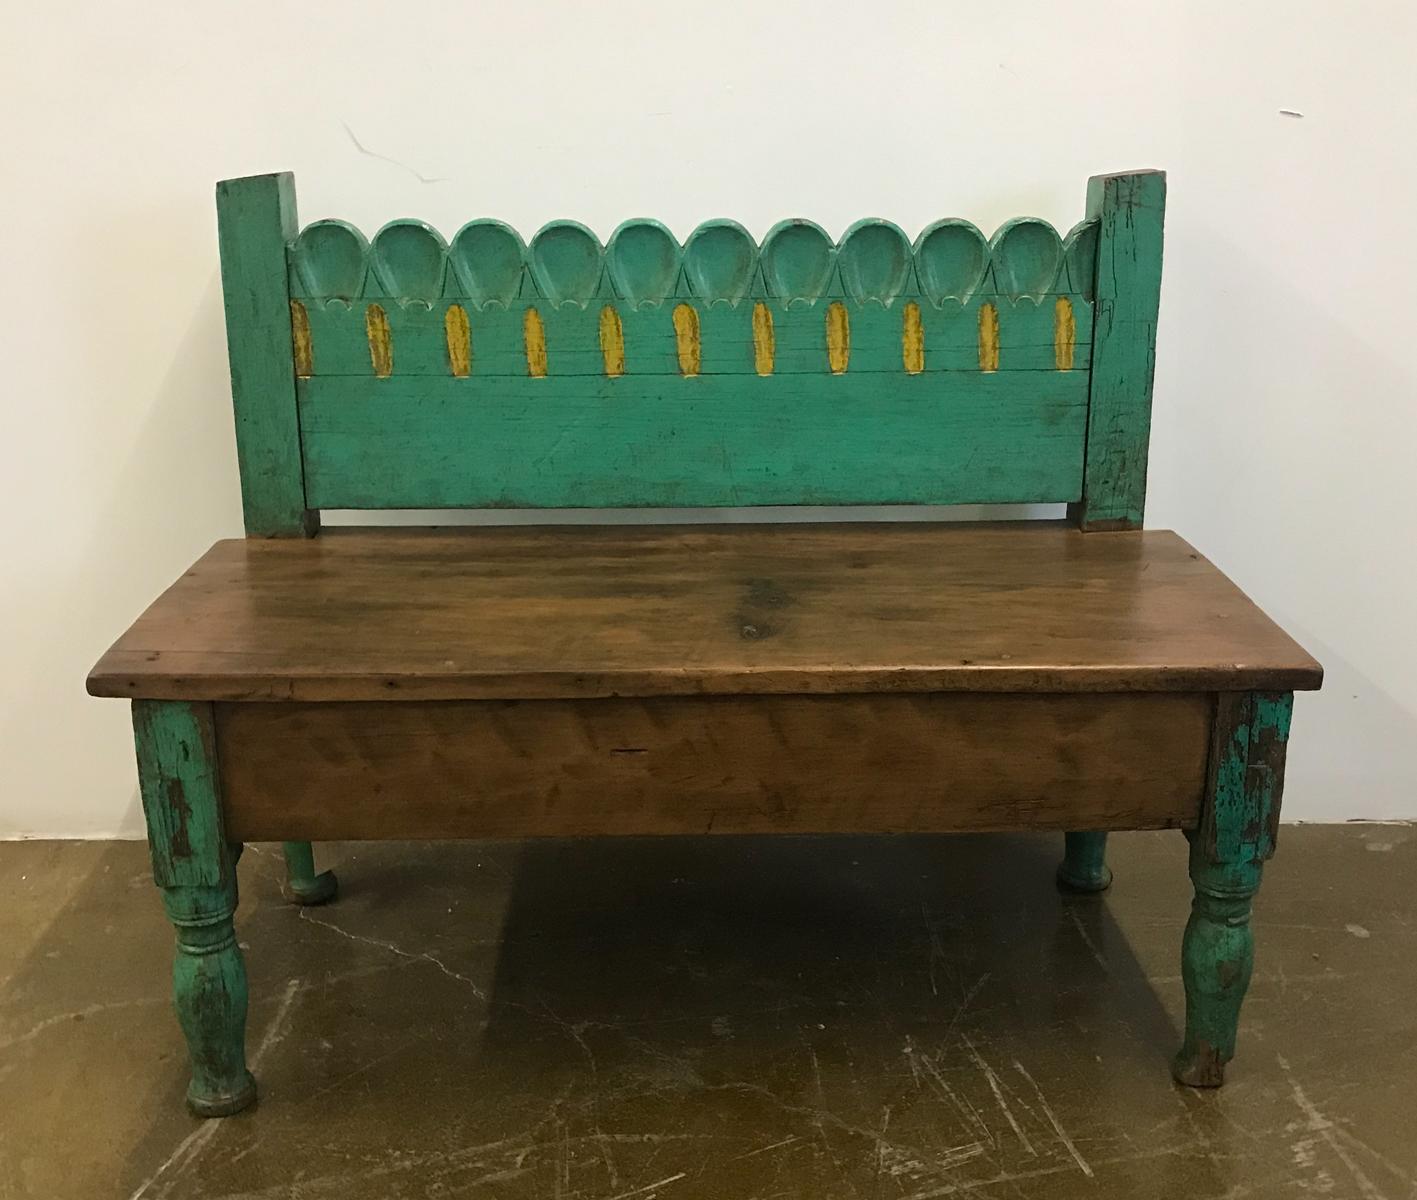 Small painted bench, refashioned from an old, 19th c bed. New construction so it is very sturdy. Turned legs. Yellow and green original paint